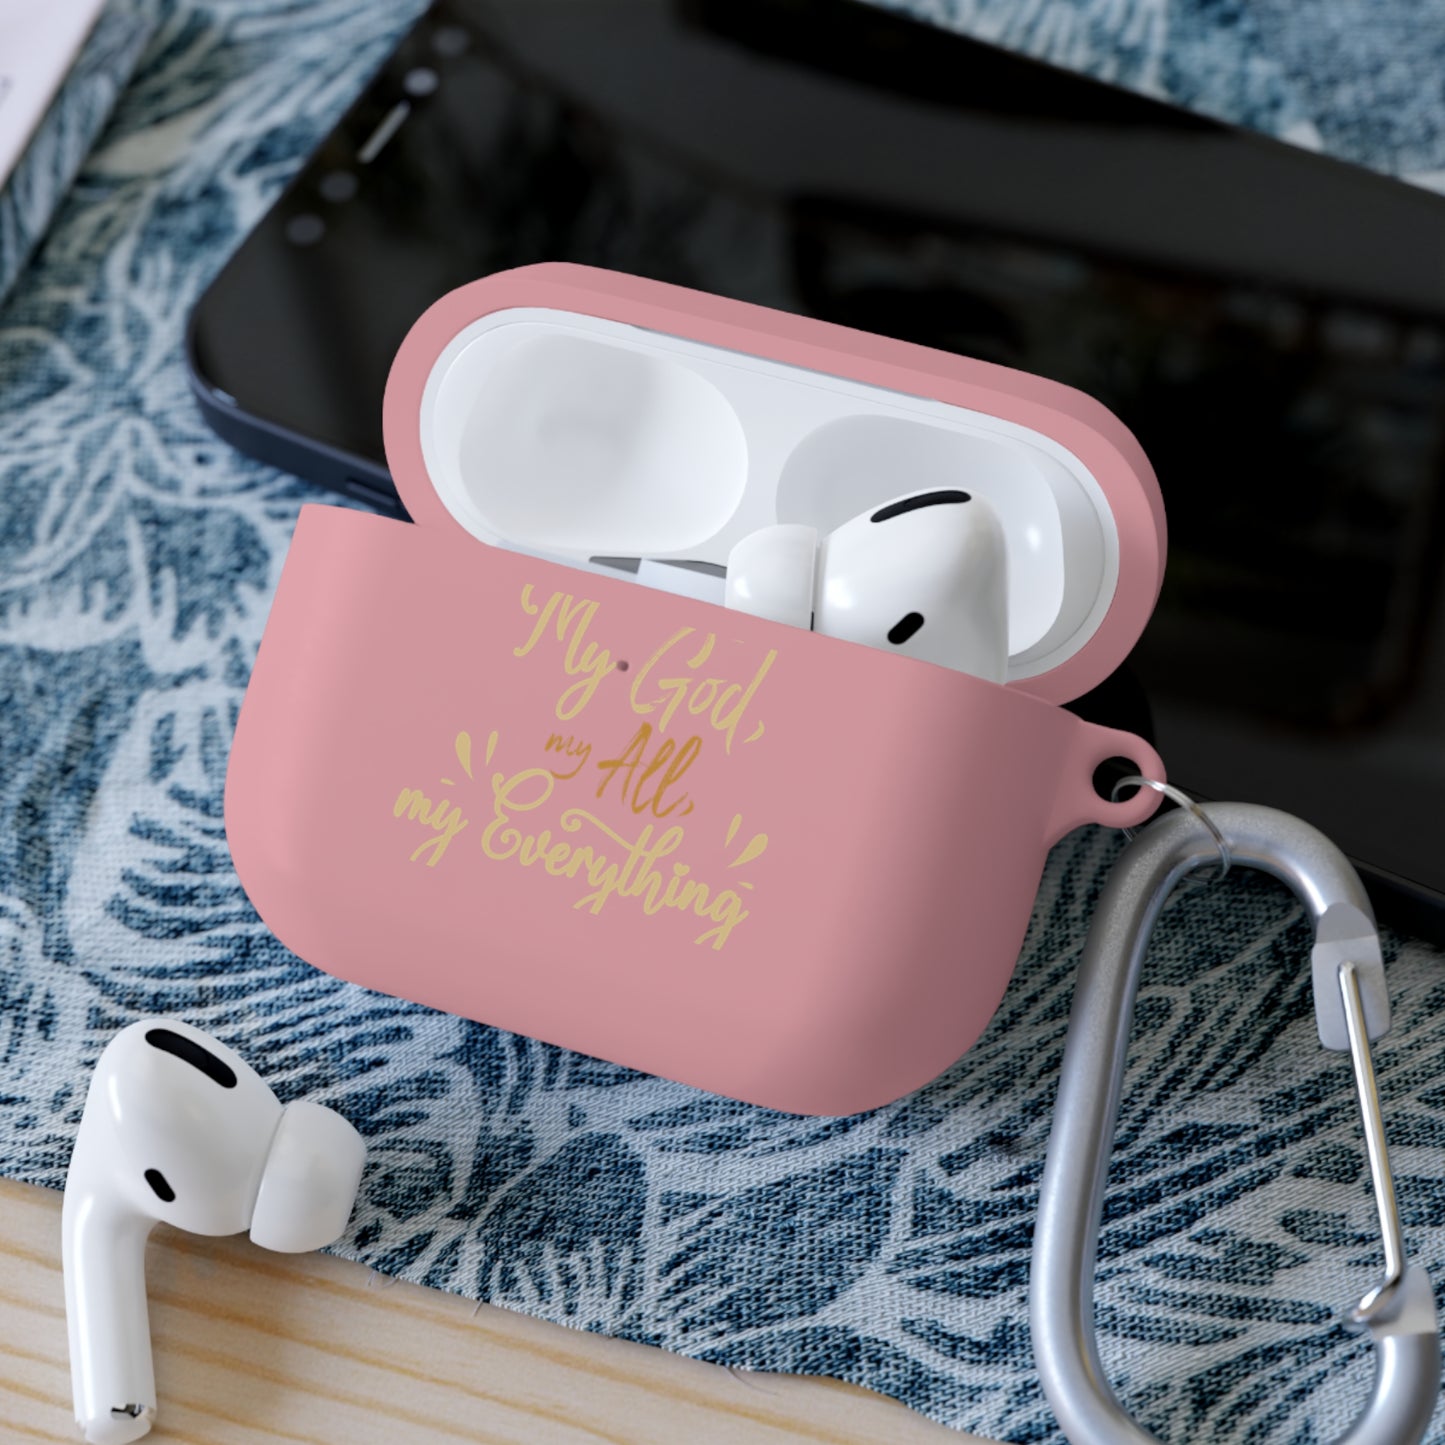 My God My All My Everything Airpod / Airpods Pro Case cover